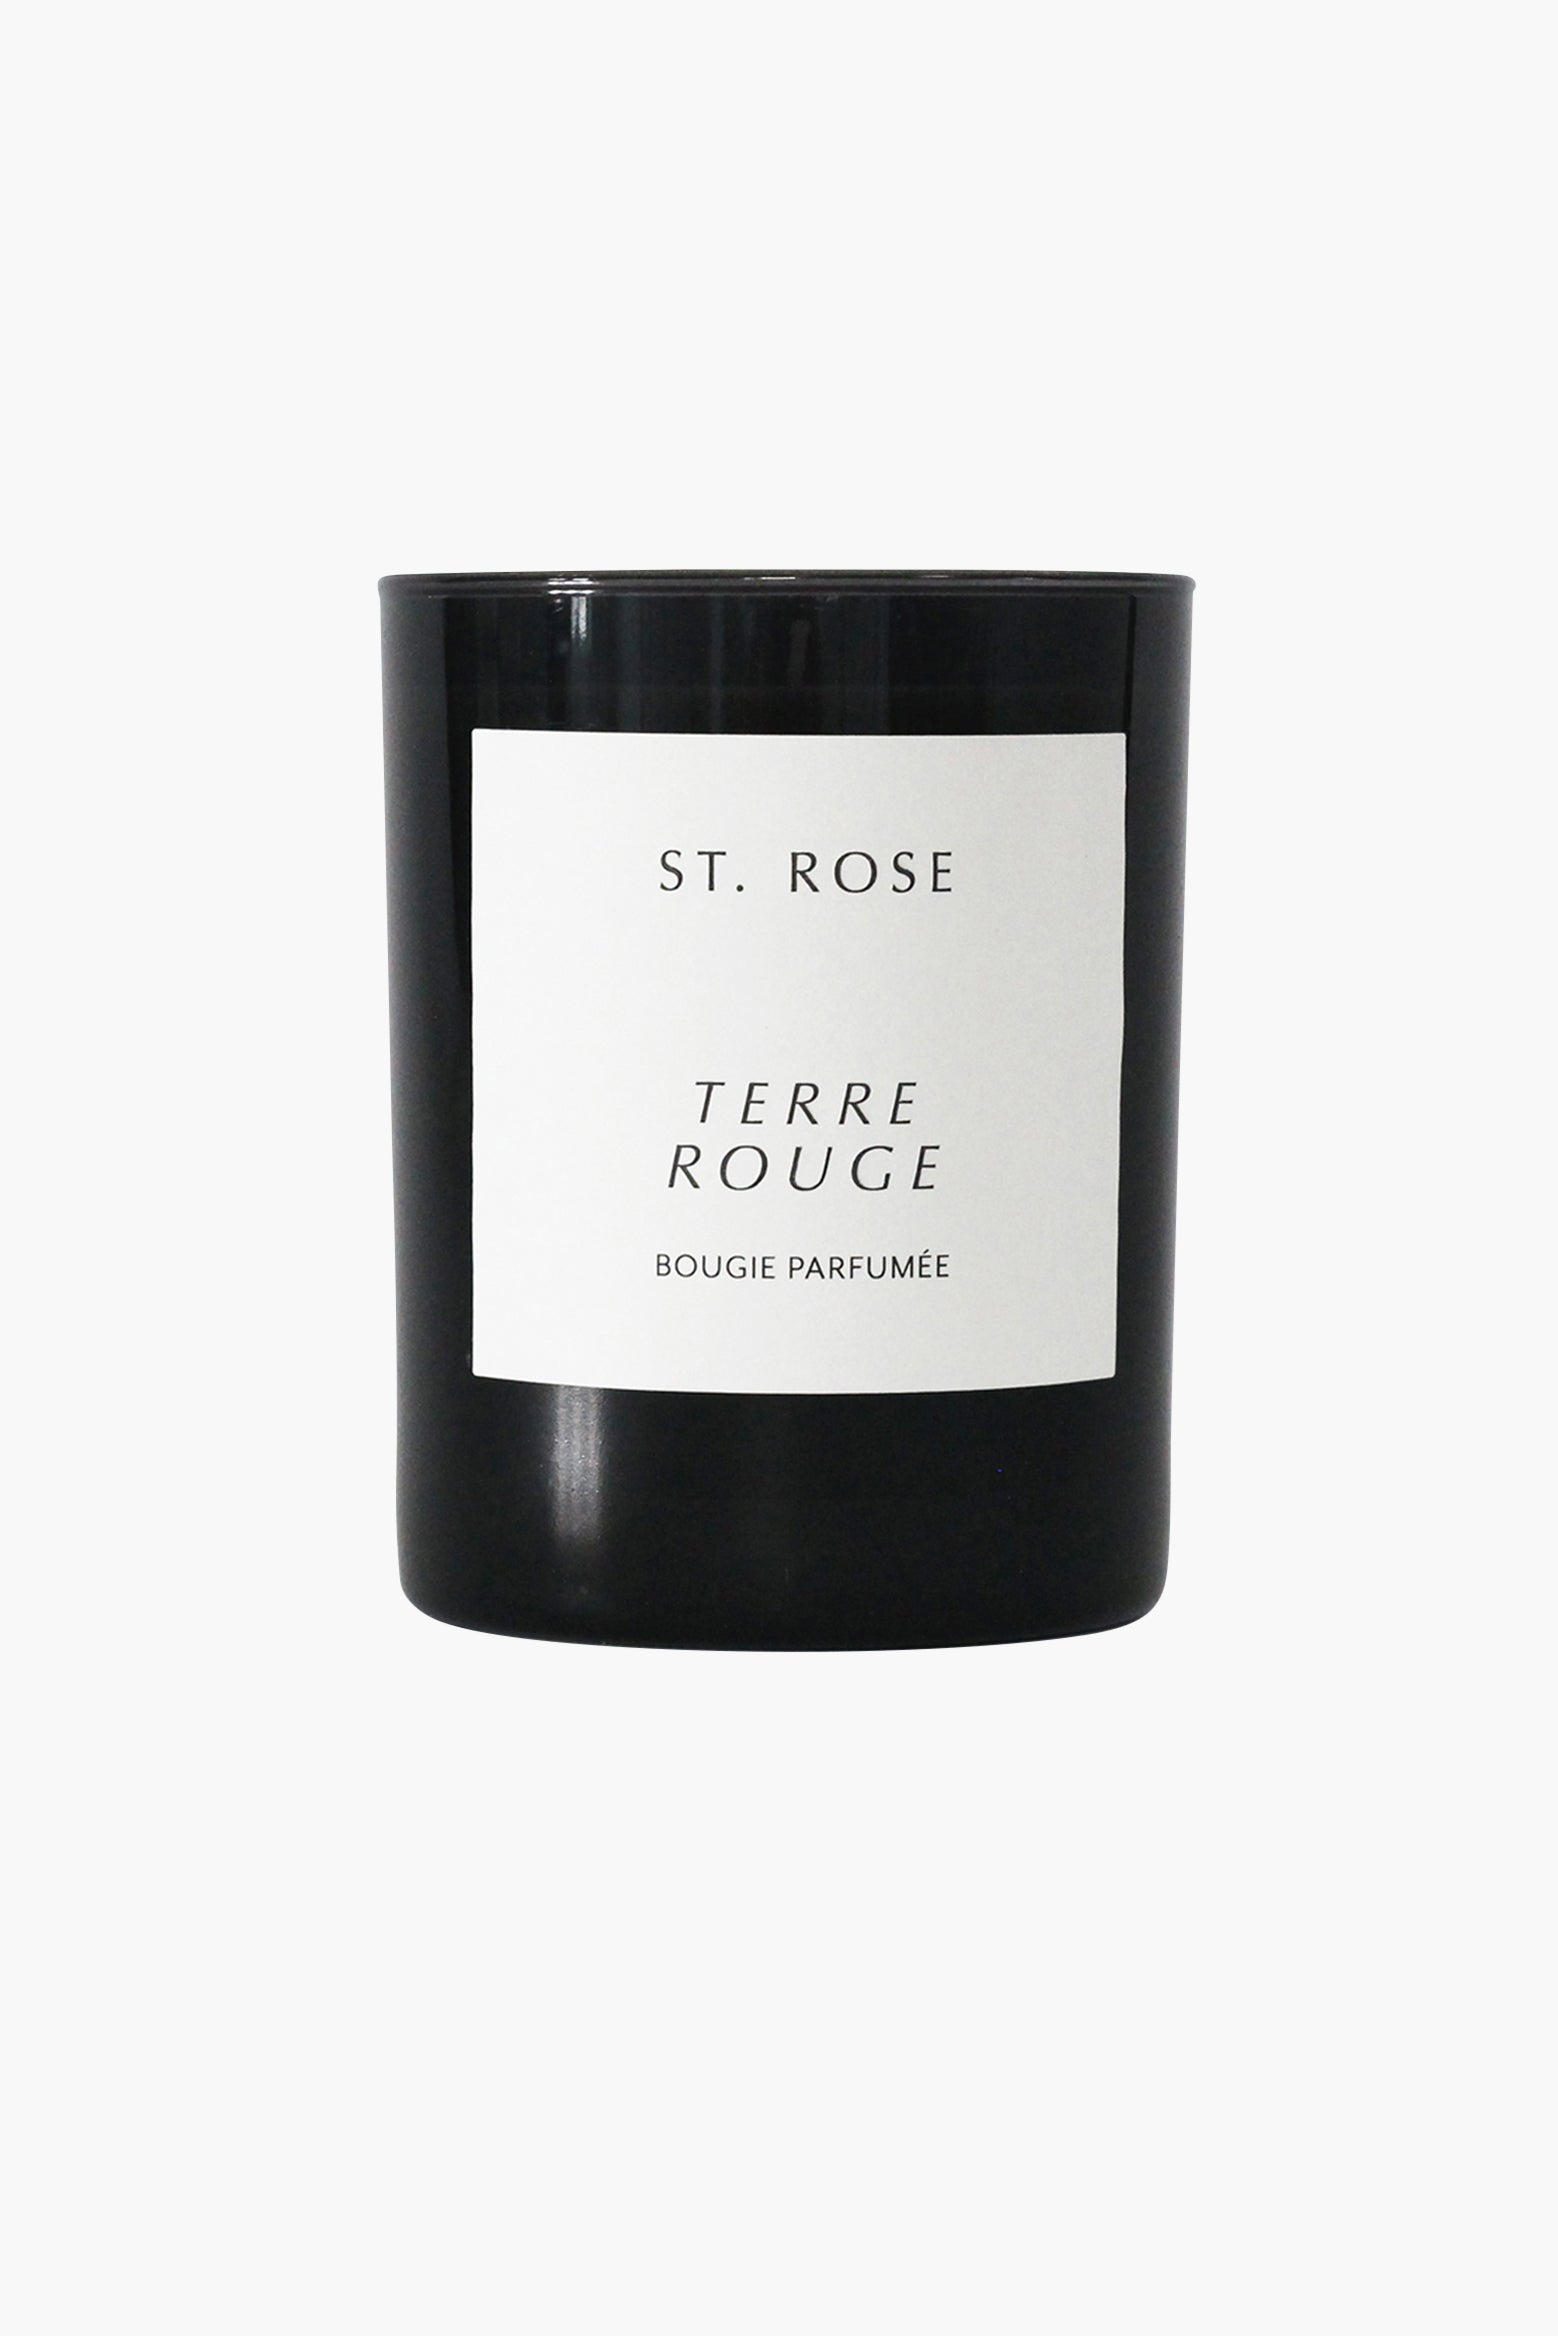 St. Rose Terre Rouge Candle available at The New Trend